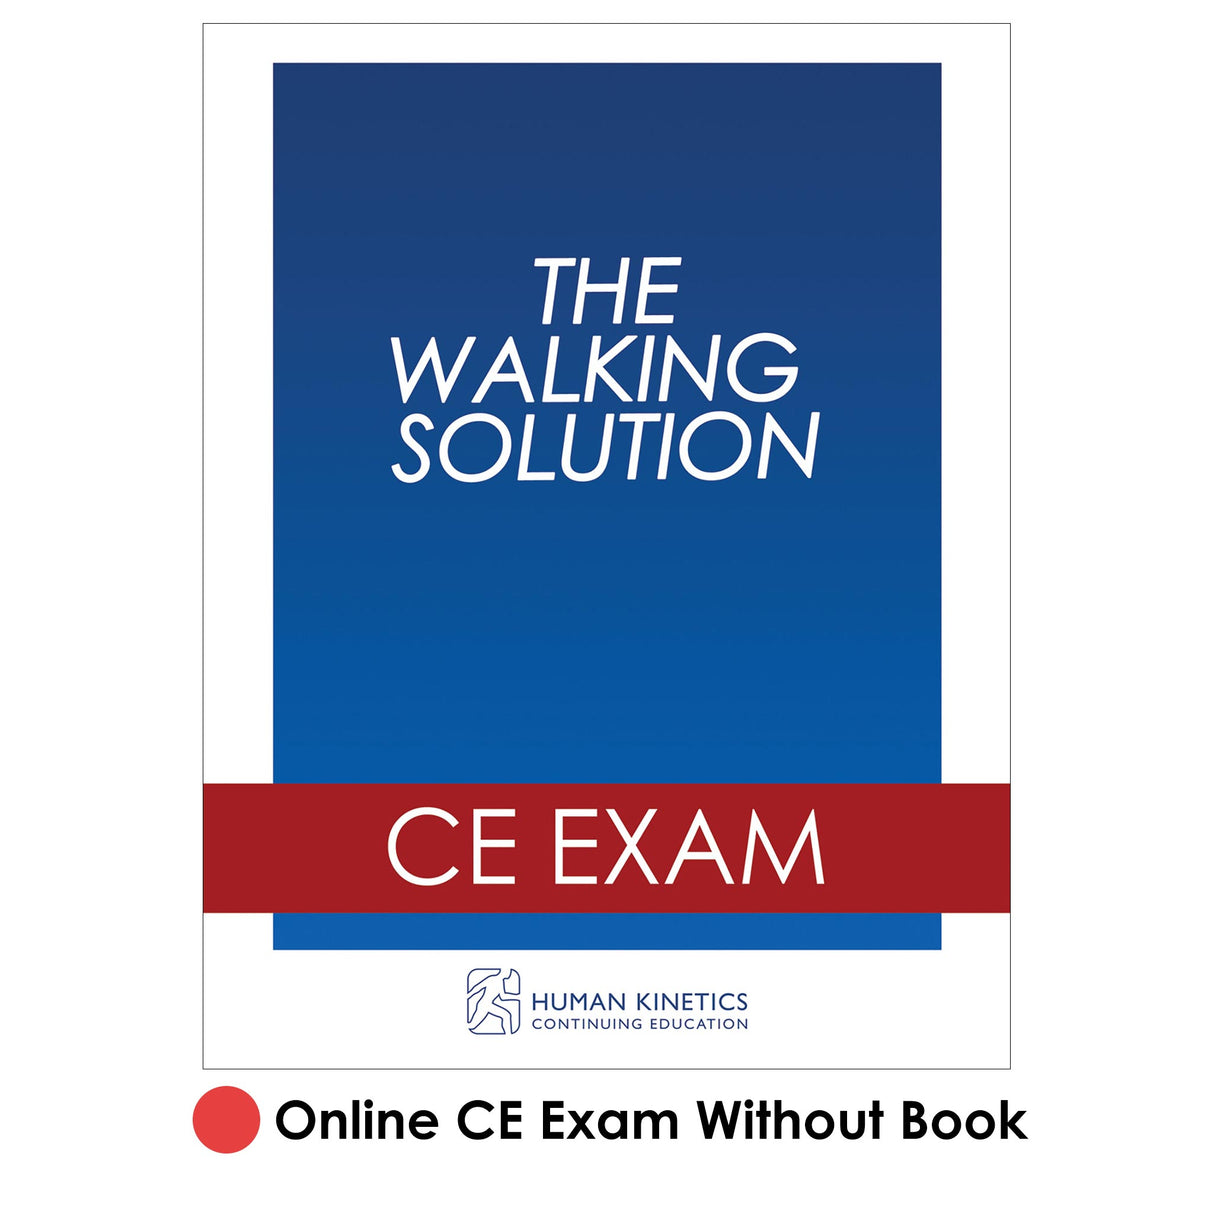 Walking Solution Online CE Exam Without Book, The